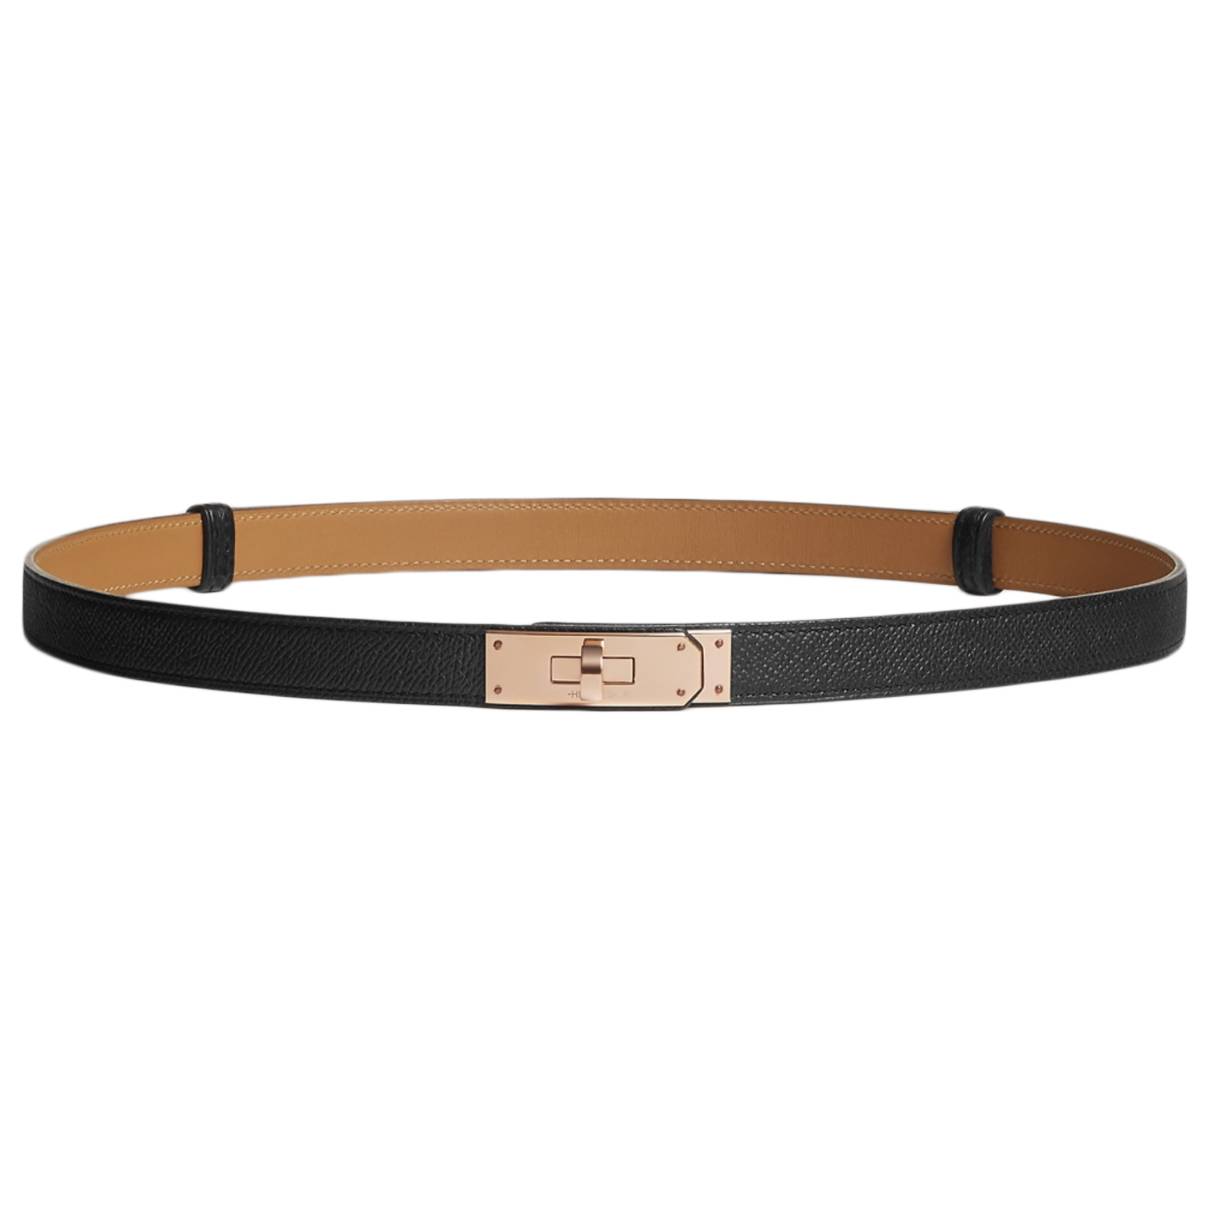 Hermès - Authenticated Kelly Belt - Leather Black Plain for Women, Never Worn, with Tag